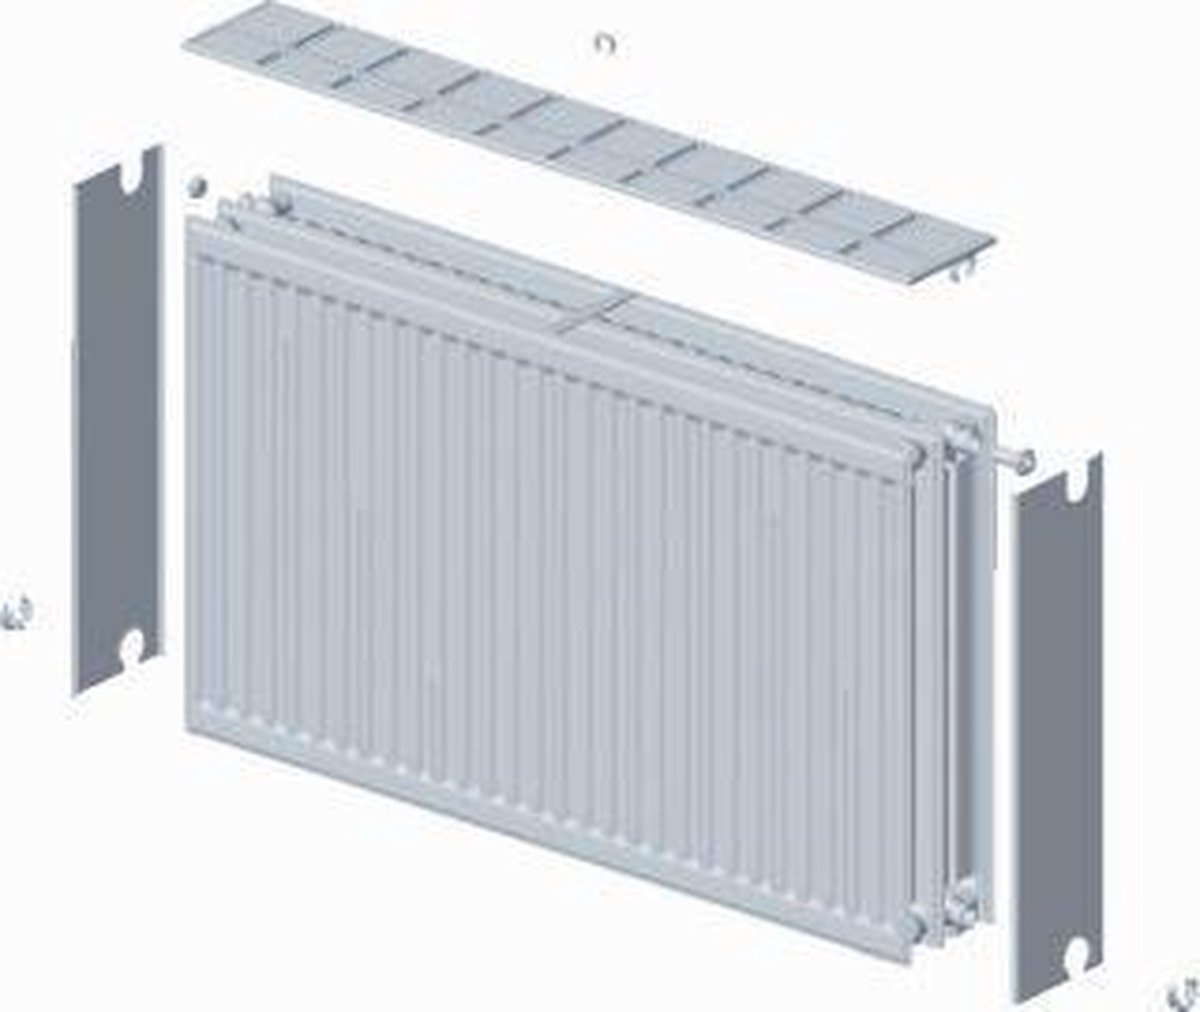 Stelrad paneelradiator Novello, staal, wit, (hxlxd) 900x600x158mm, 33